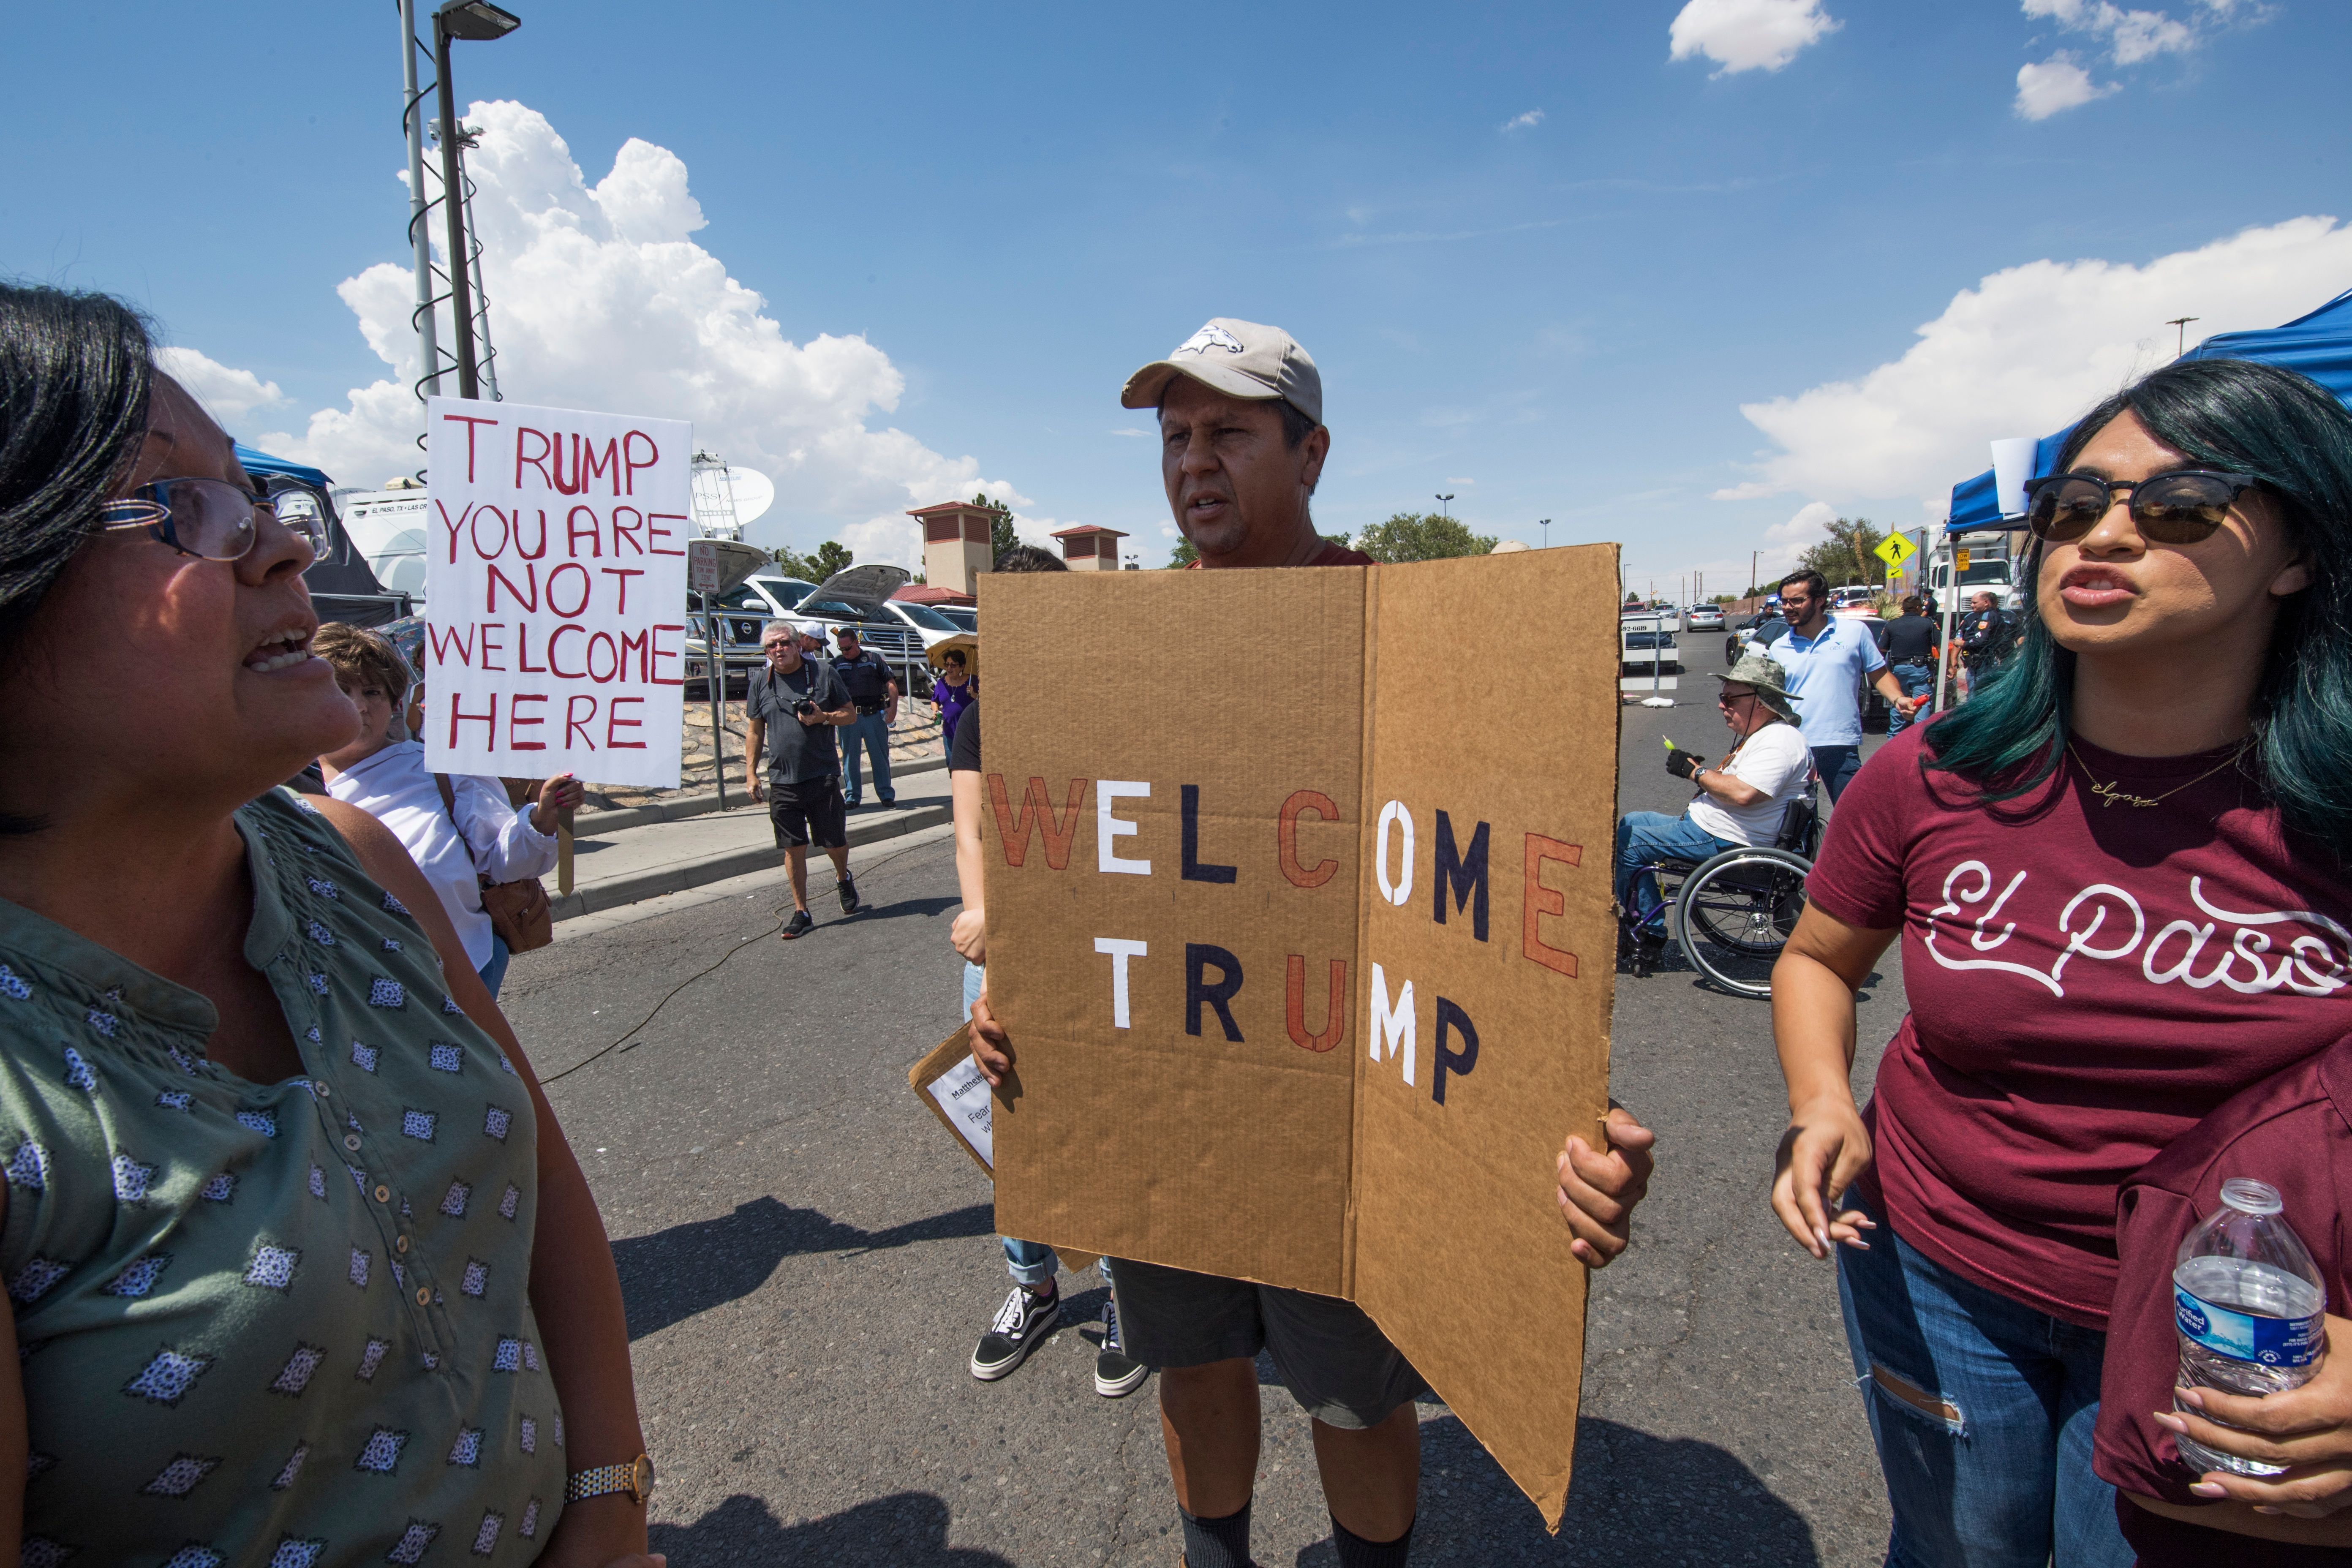 Anti-Trump protesters argue with Trump supporters outside the makeshift memorial to the victims of the WalMart shooting that left a total of 22 people dead, in El Paso, Texas, on August 7